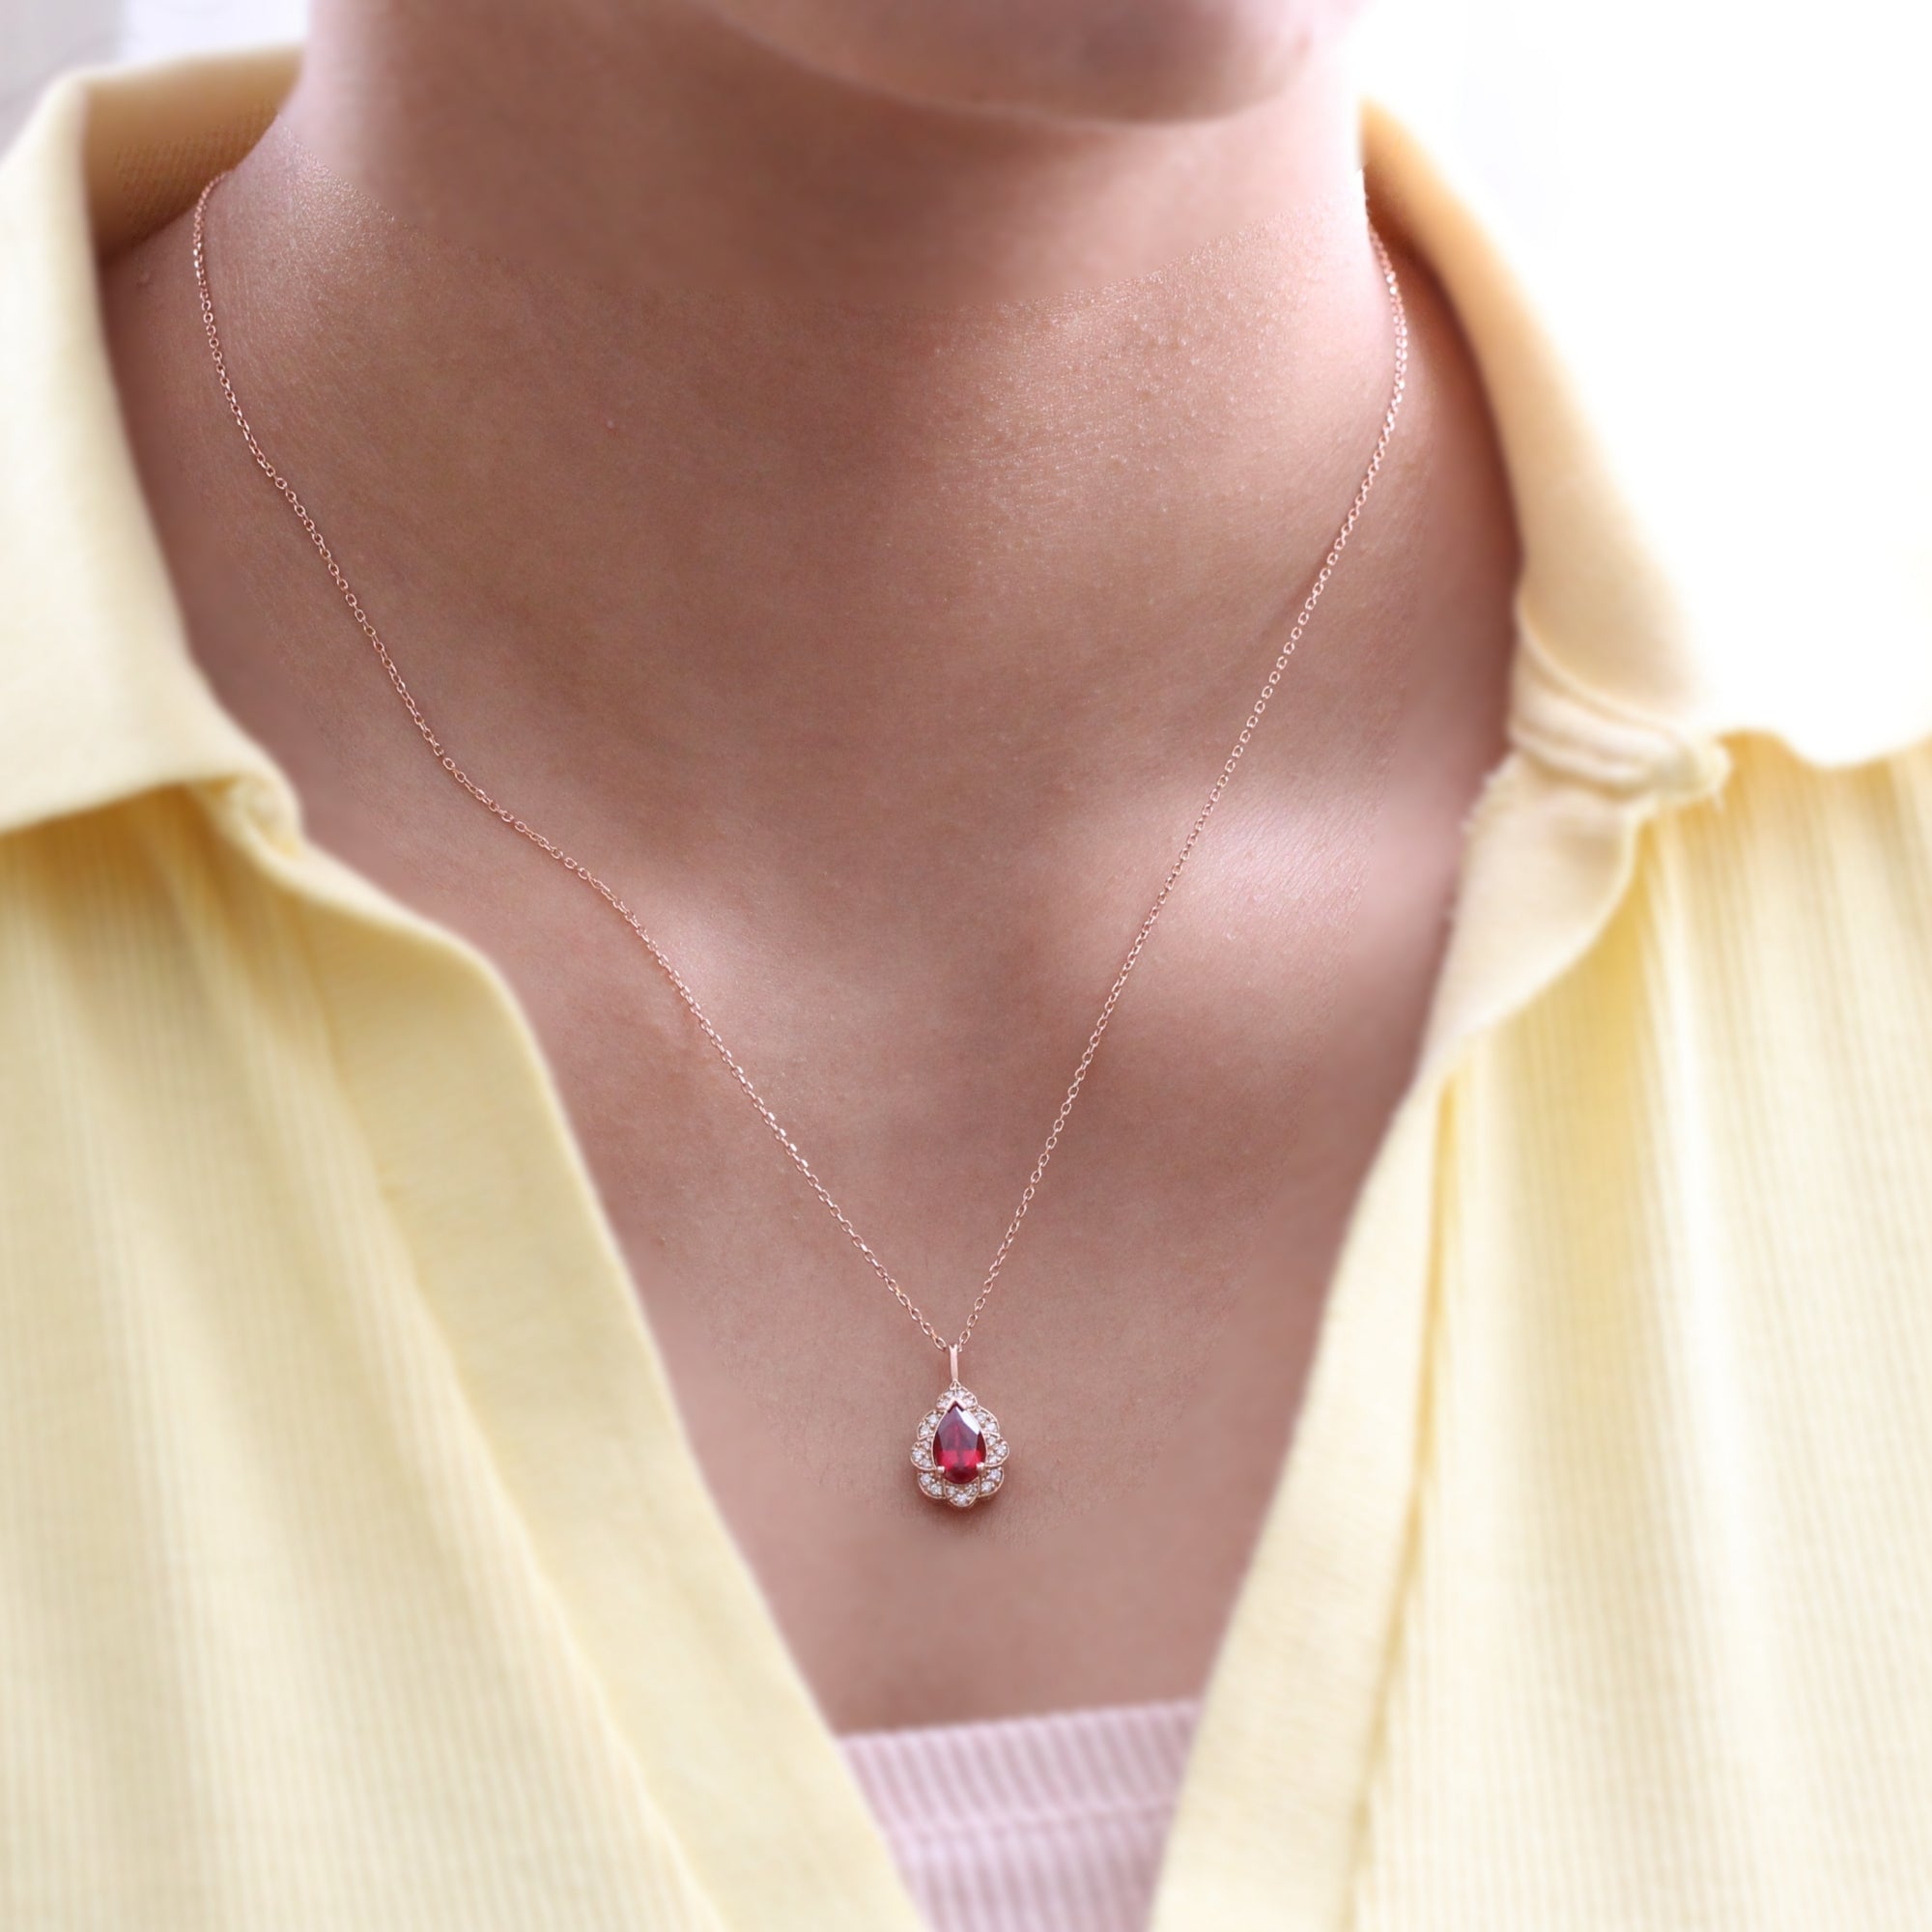 Pear ruby necklace rose gold vintage style ruby diamond drop pendant necklace la more design jewelry